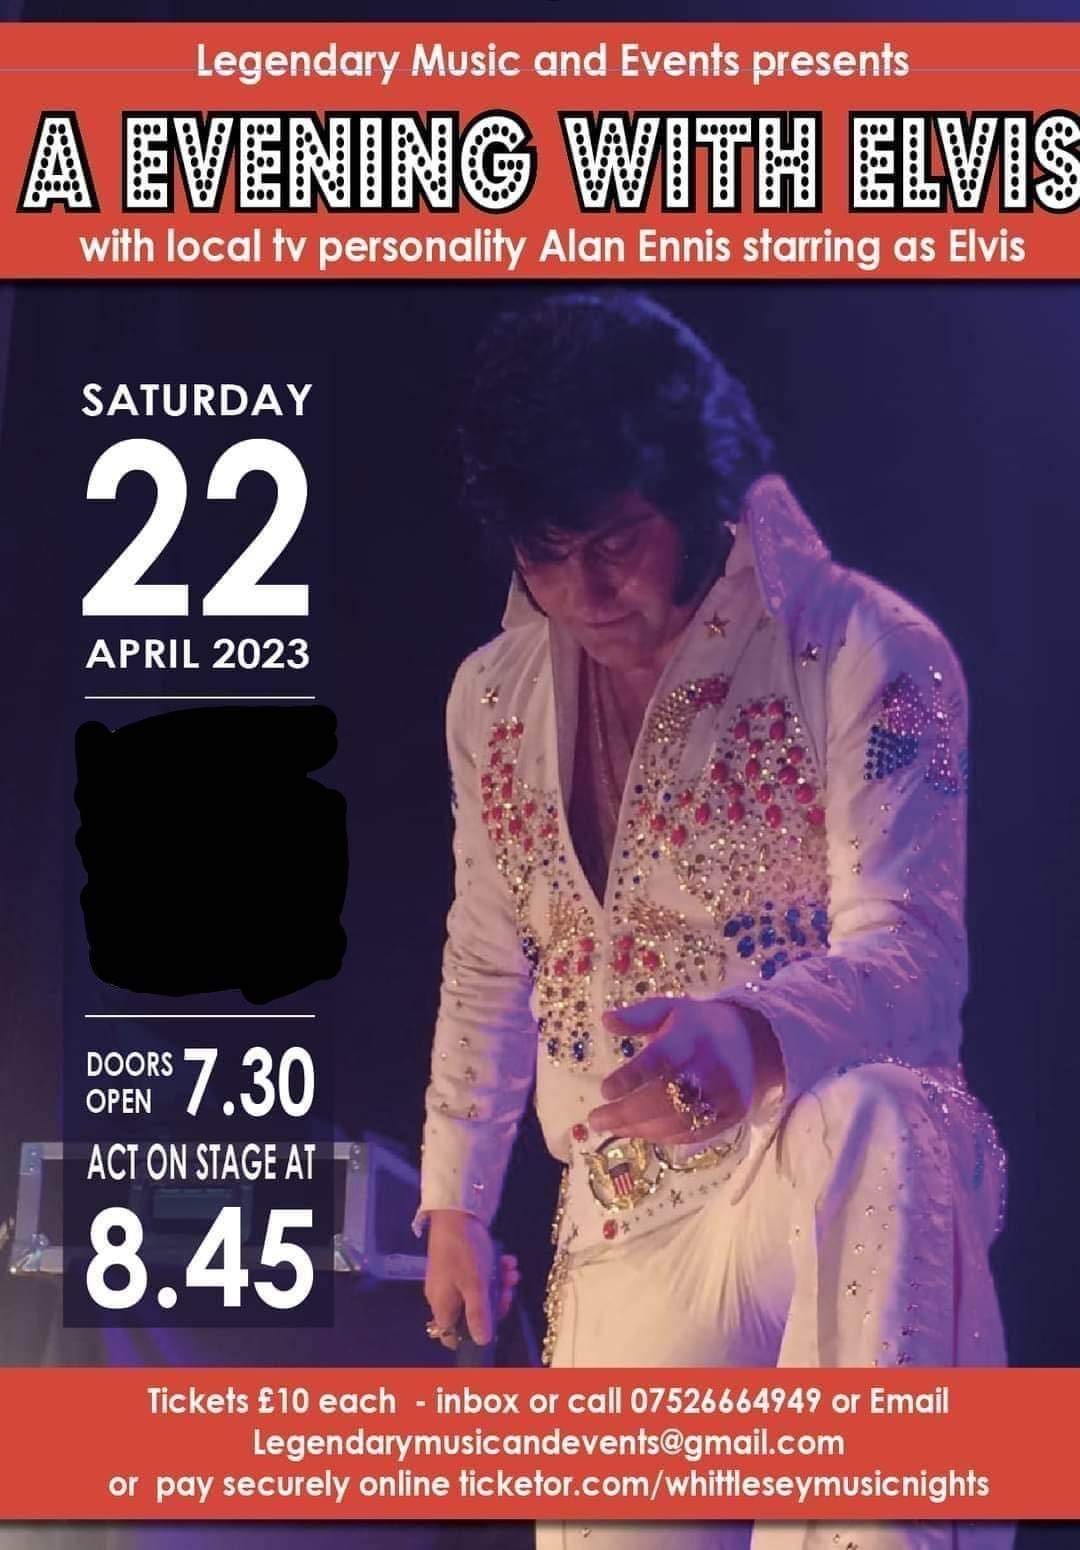 An Evening With Elvis  on Apr 22, 19:30@Yaxley Football Club - Buy tickets and Get information on whittlesey music nights 